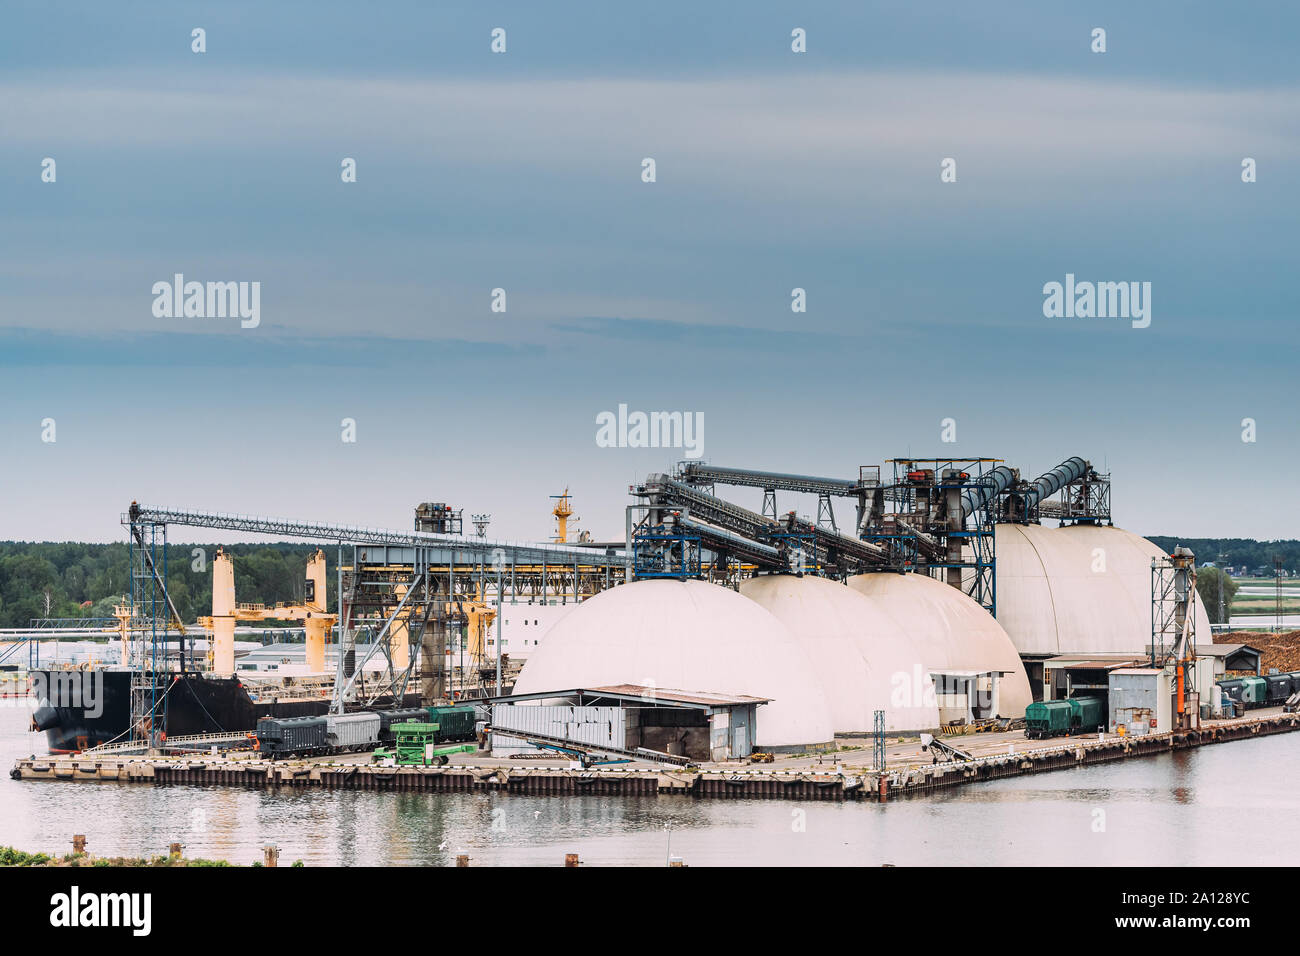 Chemical Storage Tanks And Storage Tanks Oil Refinery In Port. Industrial Port Terminal. Stock Photo